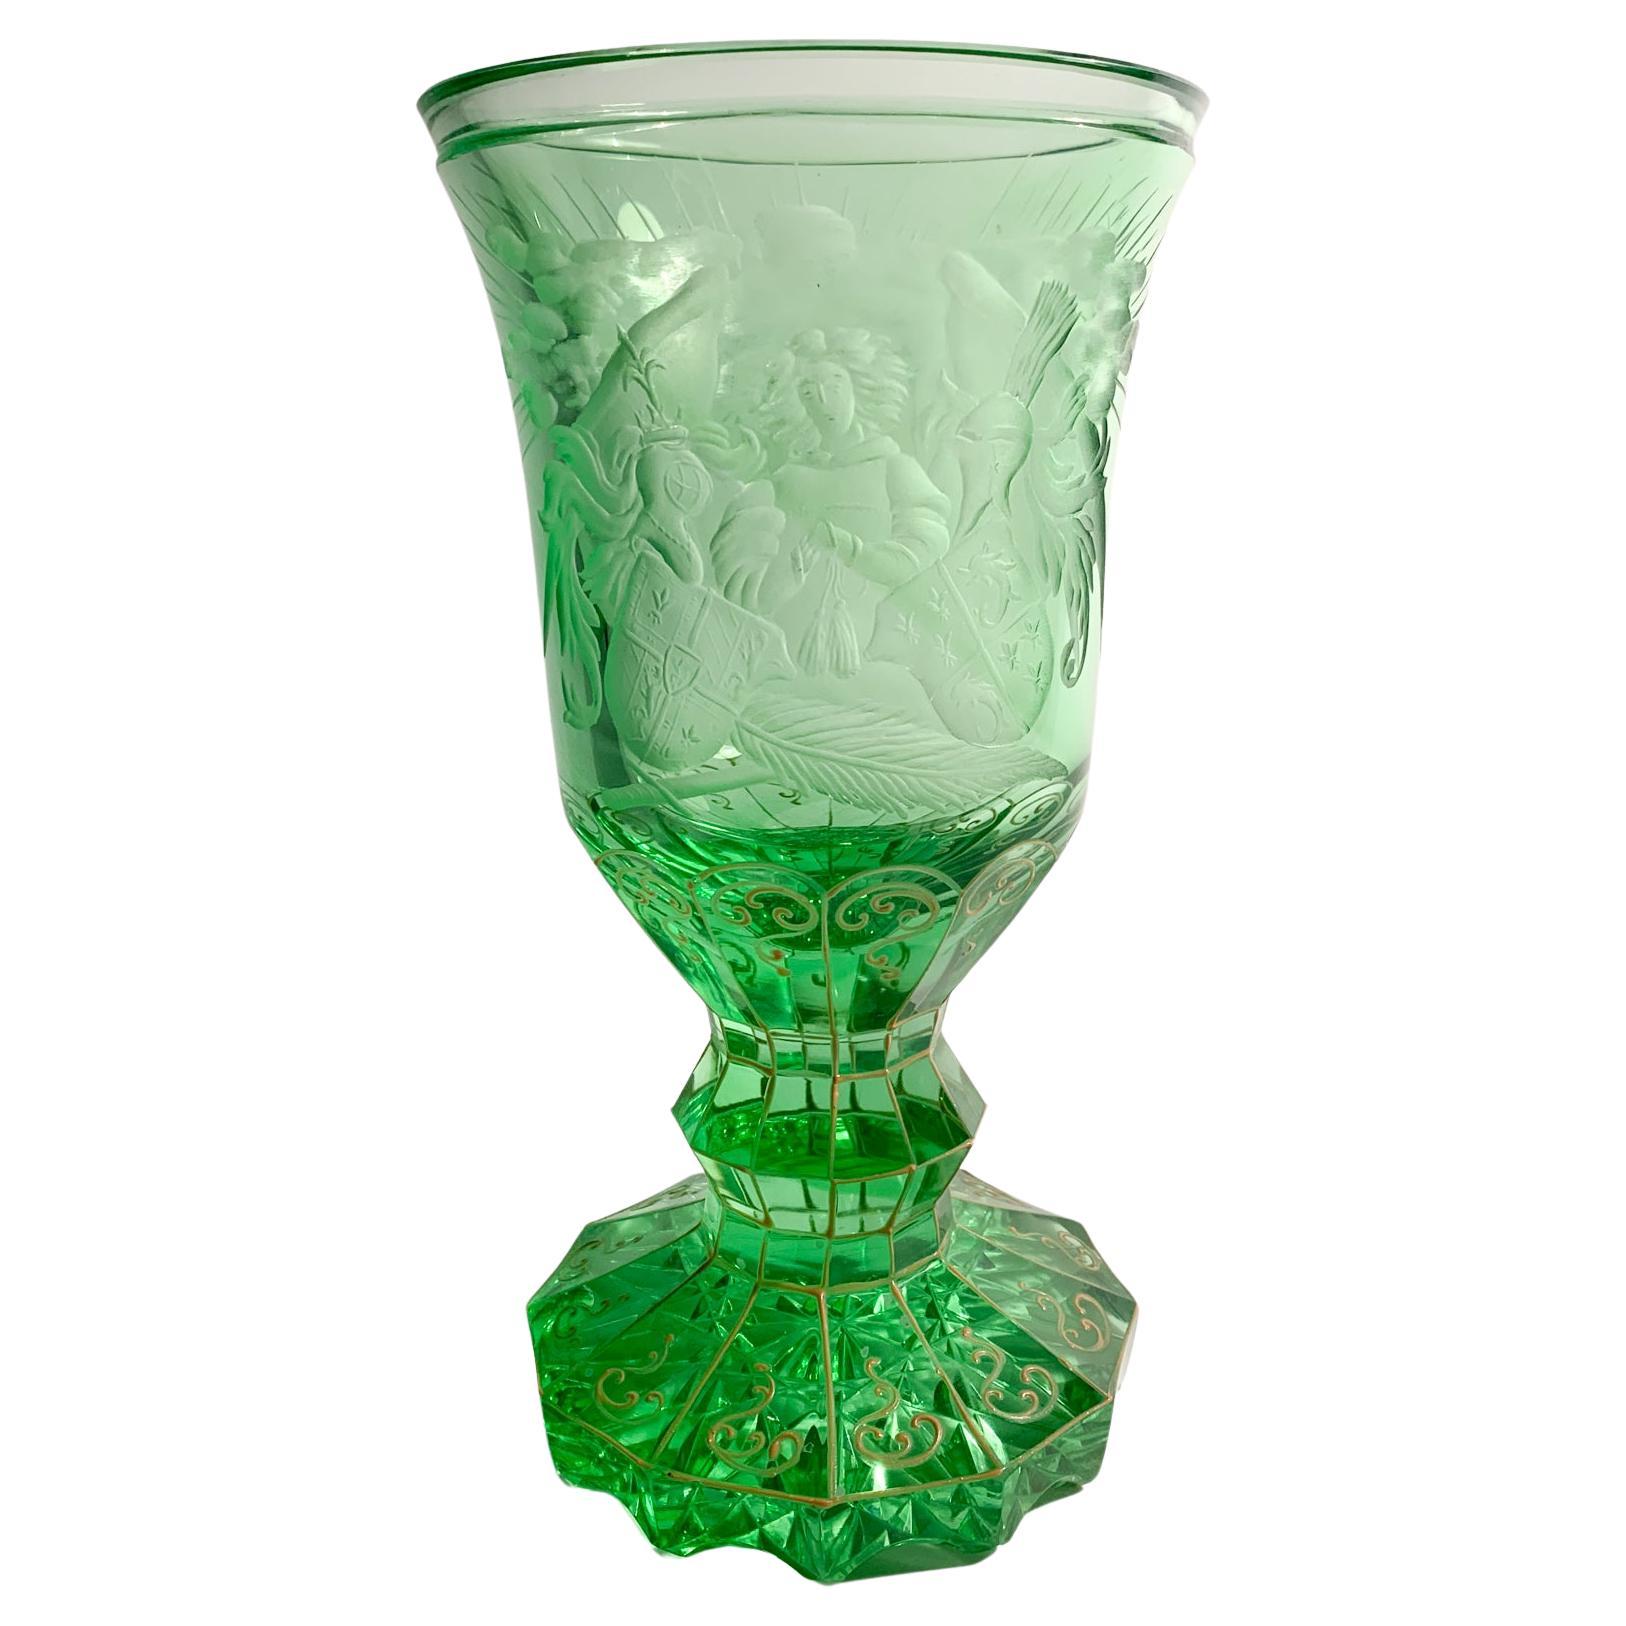 Vase in Green Biedermeier Crystal Decorated with Acid from the 1800s